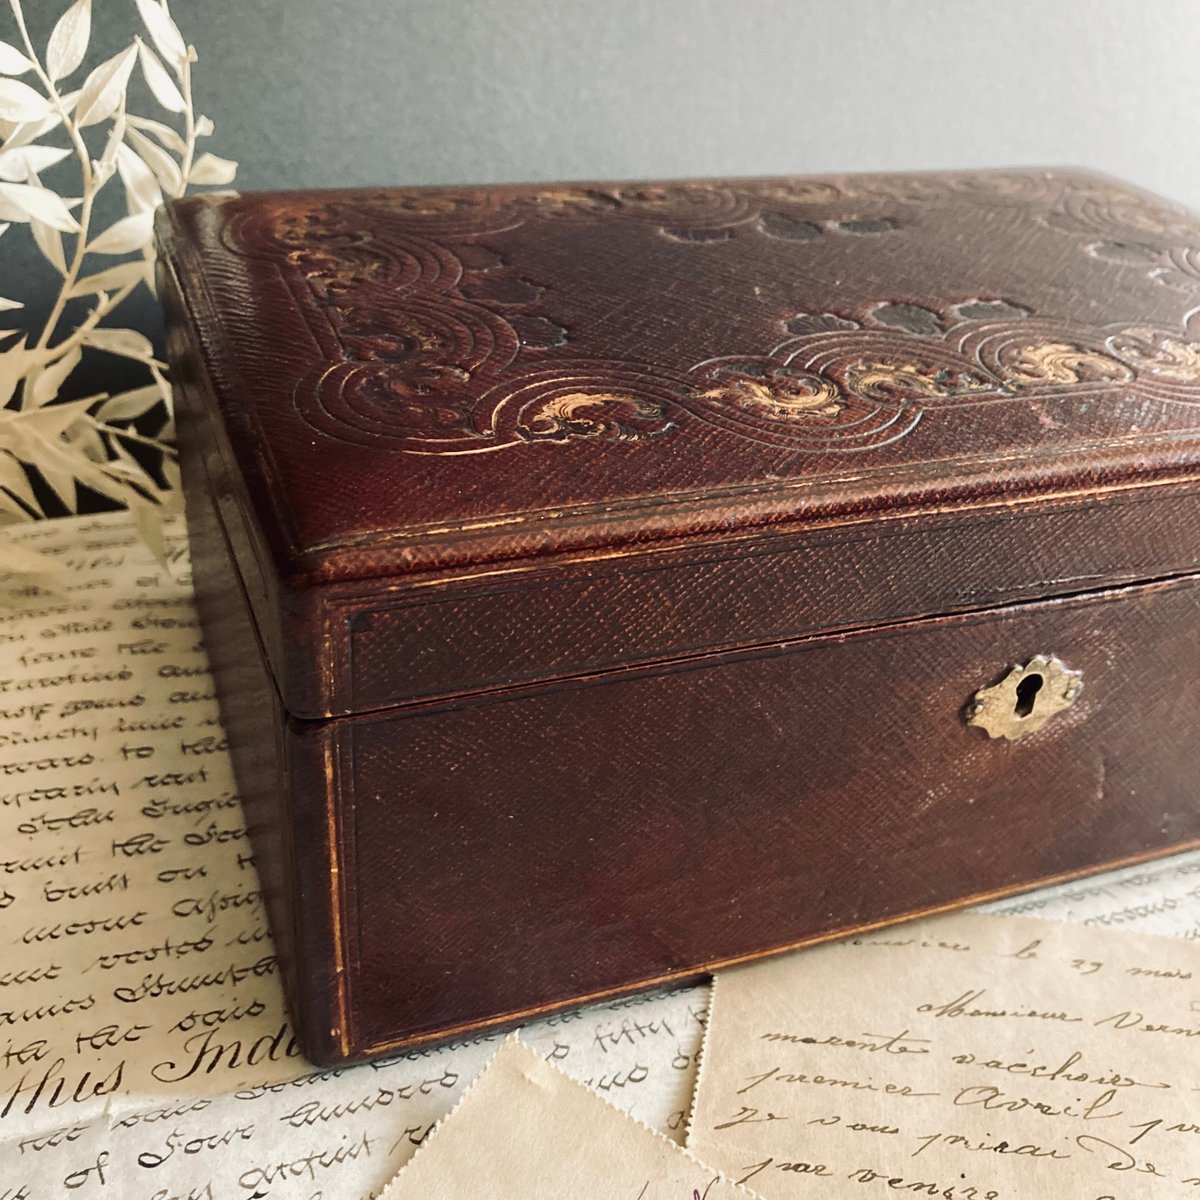 French Antique Leather Jewellery Stationary Box. Love this one etsy.me/3HjSMms #vanitybox #luxuryleather #frenchnecessaire #jewellerybox #etsy #antiques